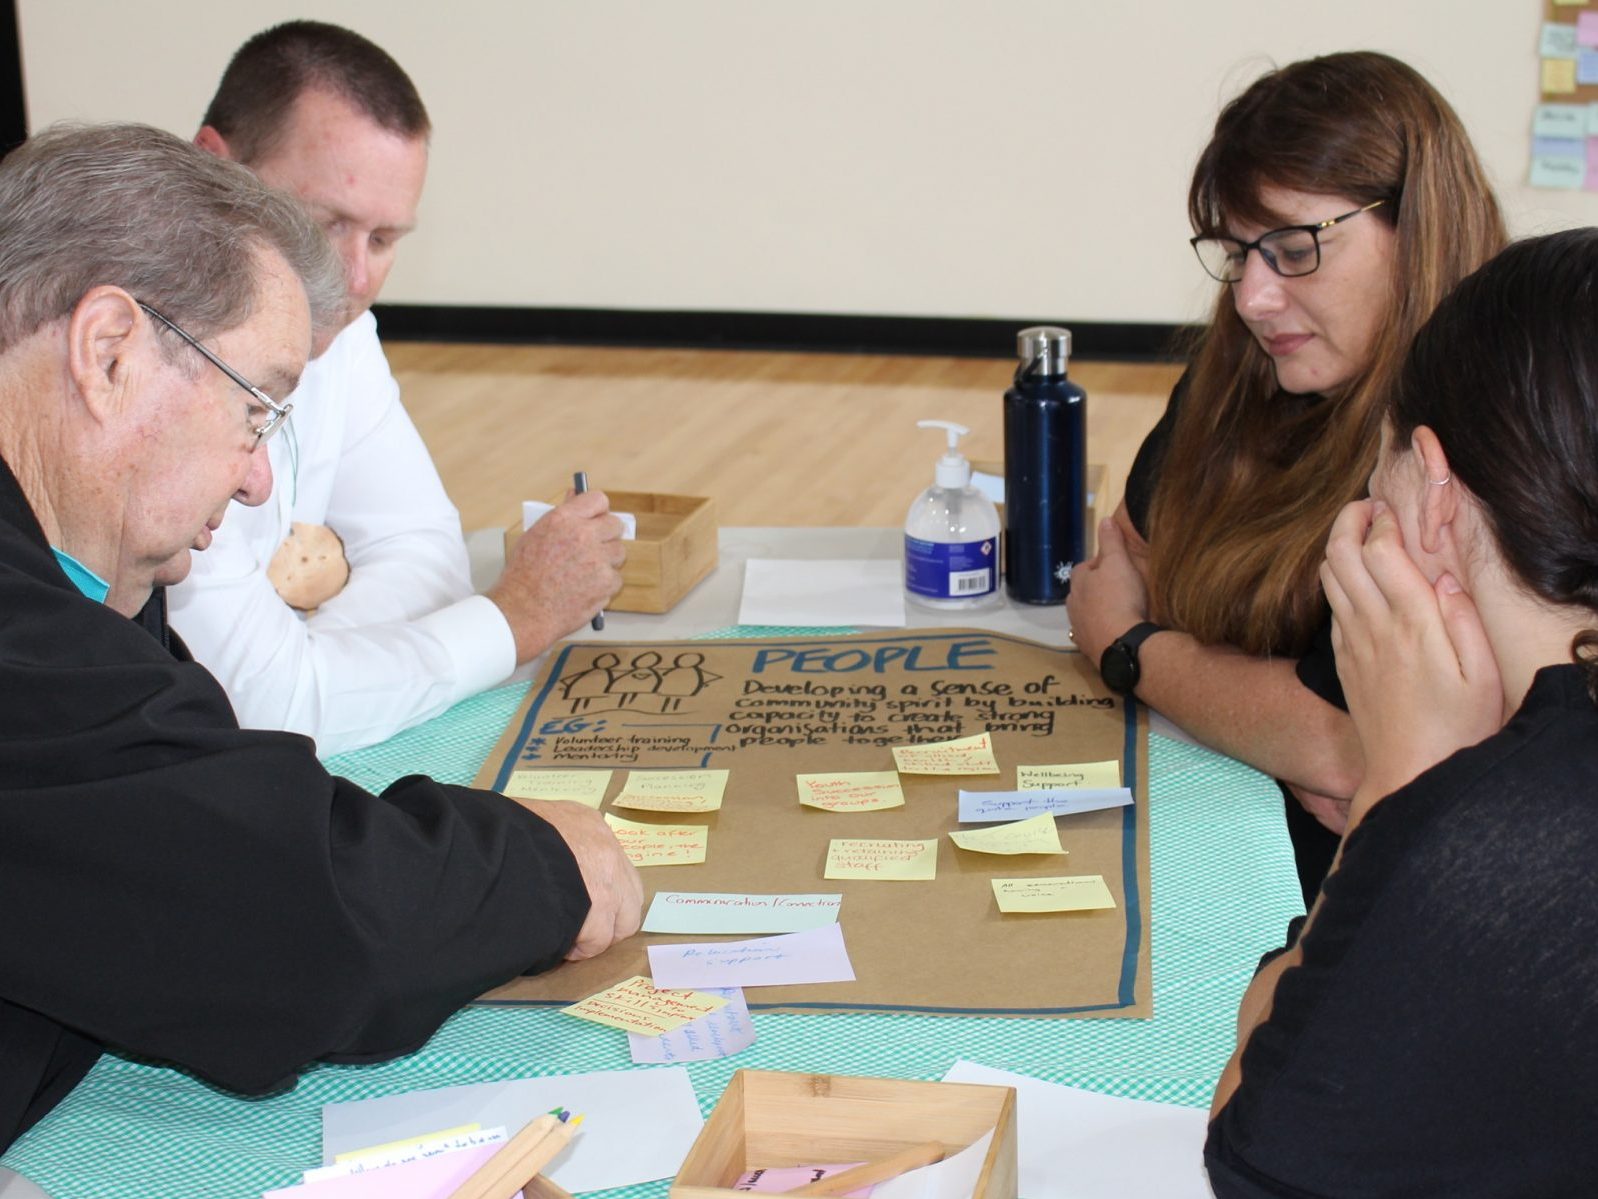 a group of people in discussion around a table with post it notes